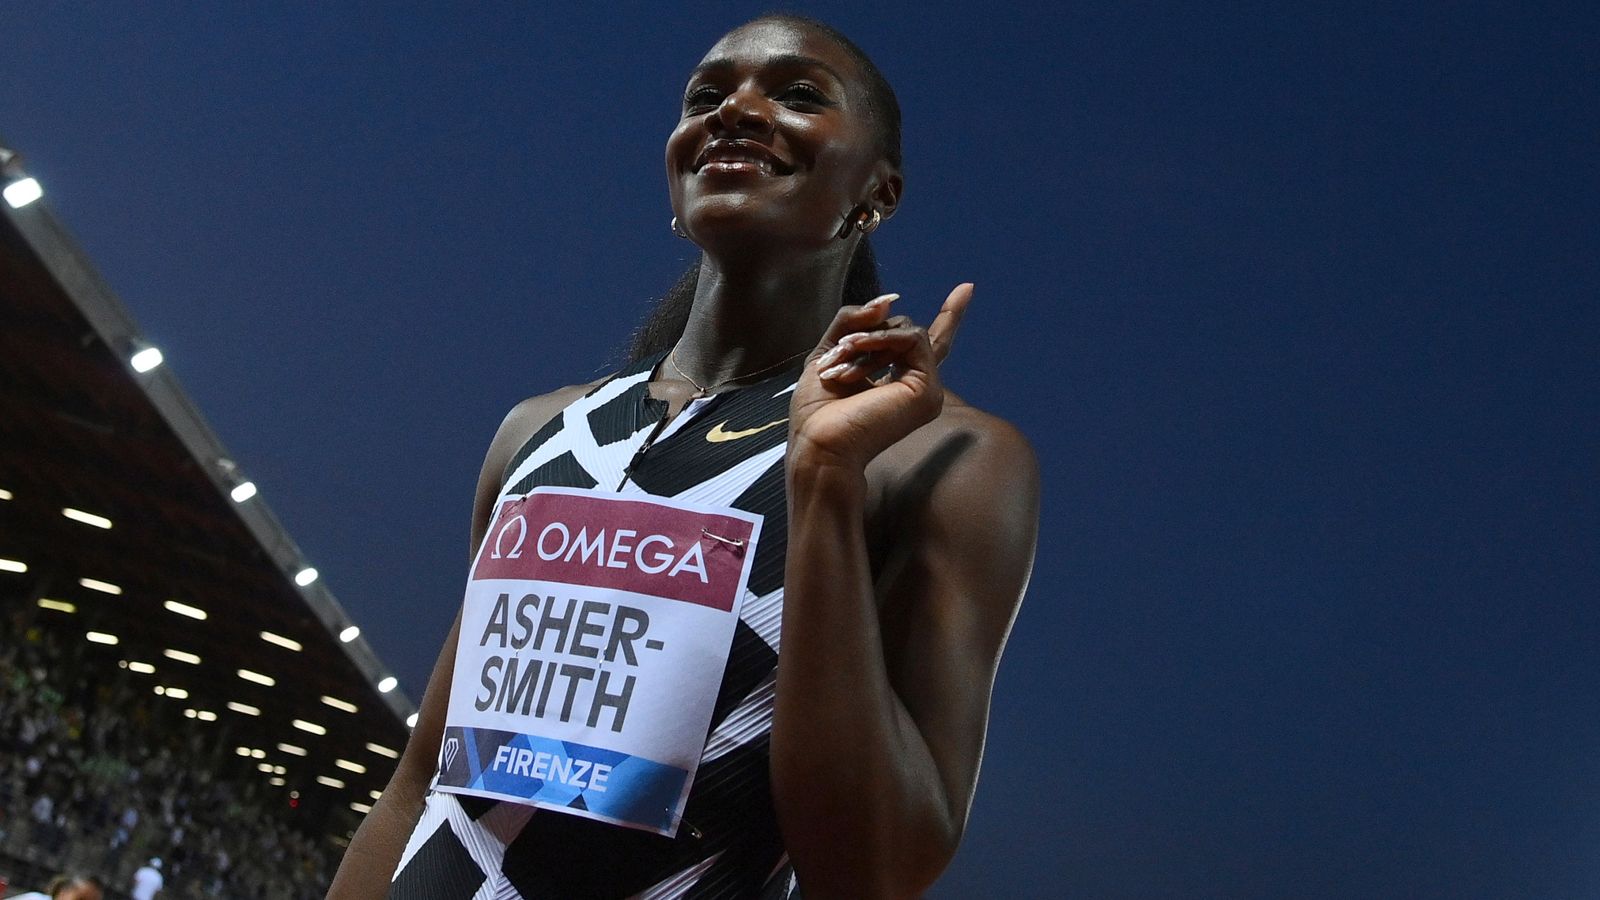 Dina Asher-Smith storms to 200m victory at Diamond League meeting in Florence